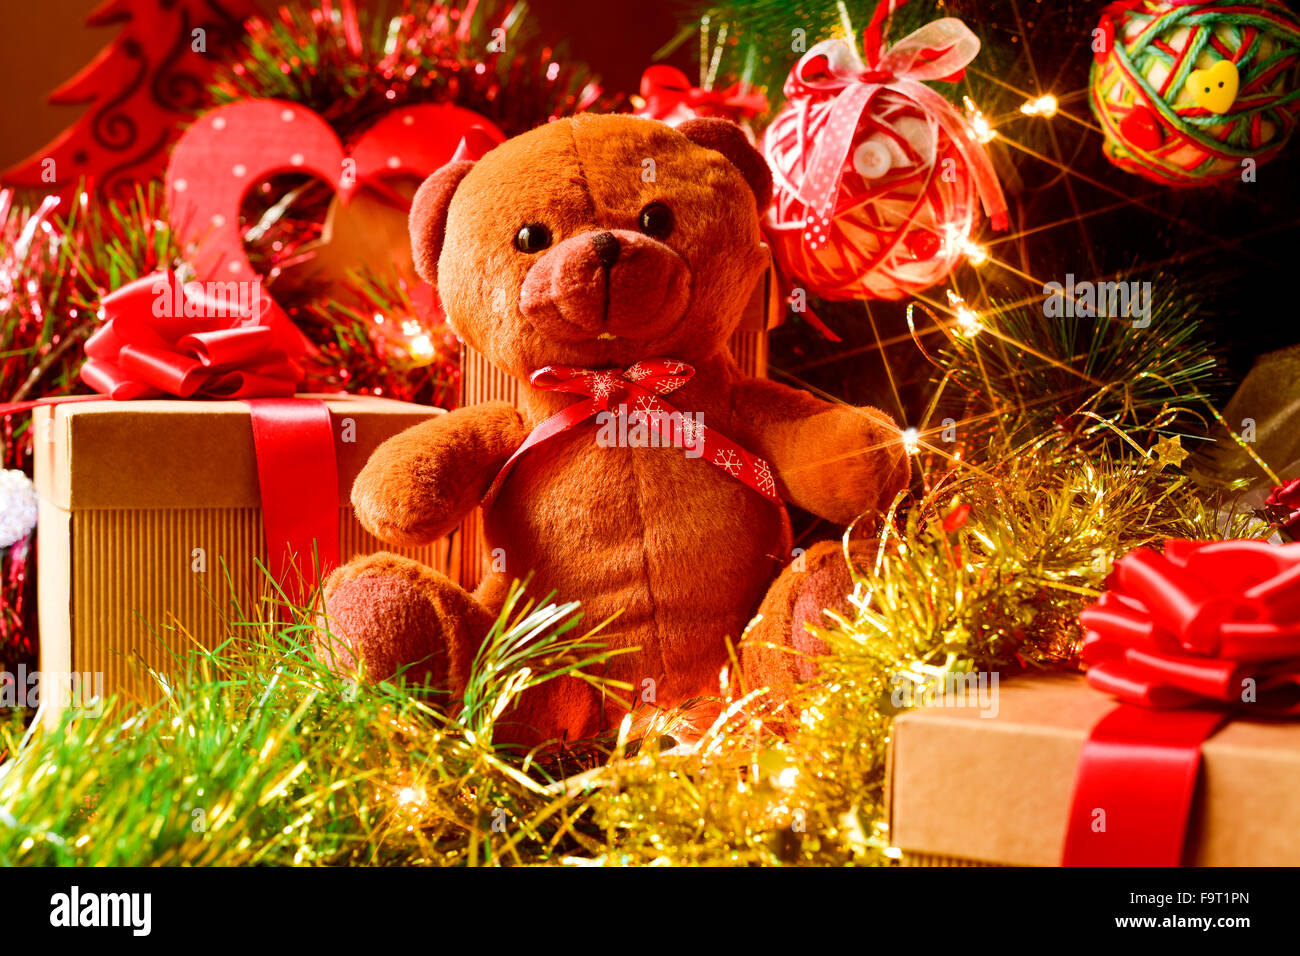 closeup of a brown teddy bear and some gifts under a christmas tree ornamented with lights, balls and tinsel Stock Photo